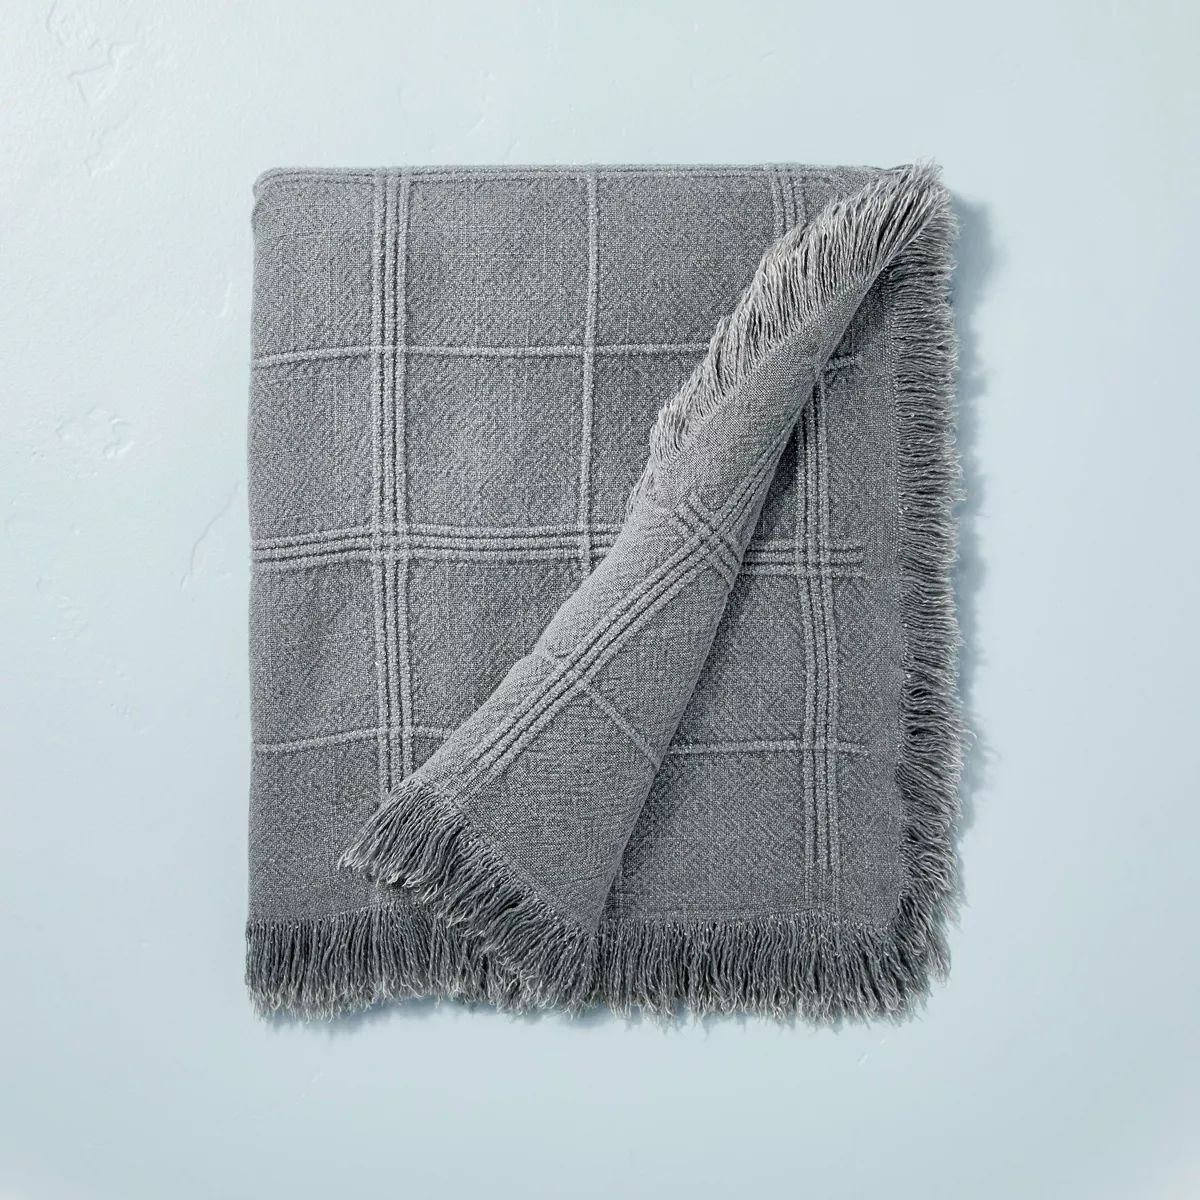 Textured Grid Lines Dobby Throw Blanket - Hearth & Hand™ with Magnolia | Target